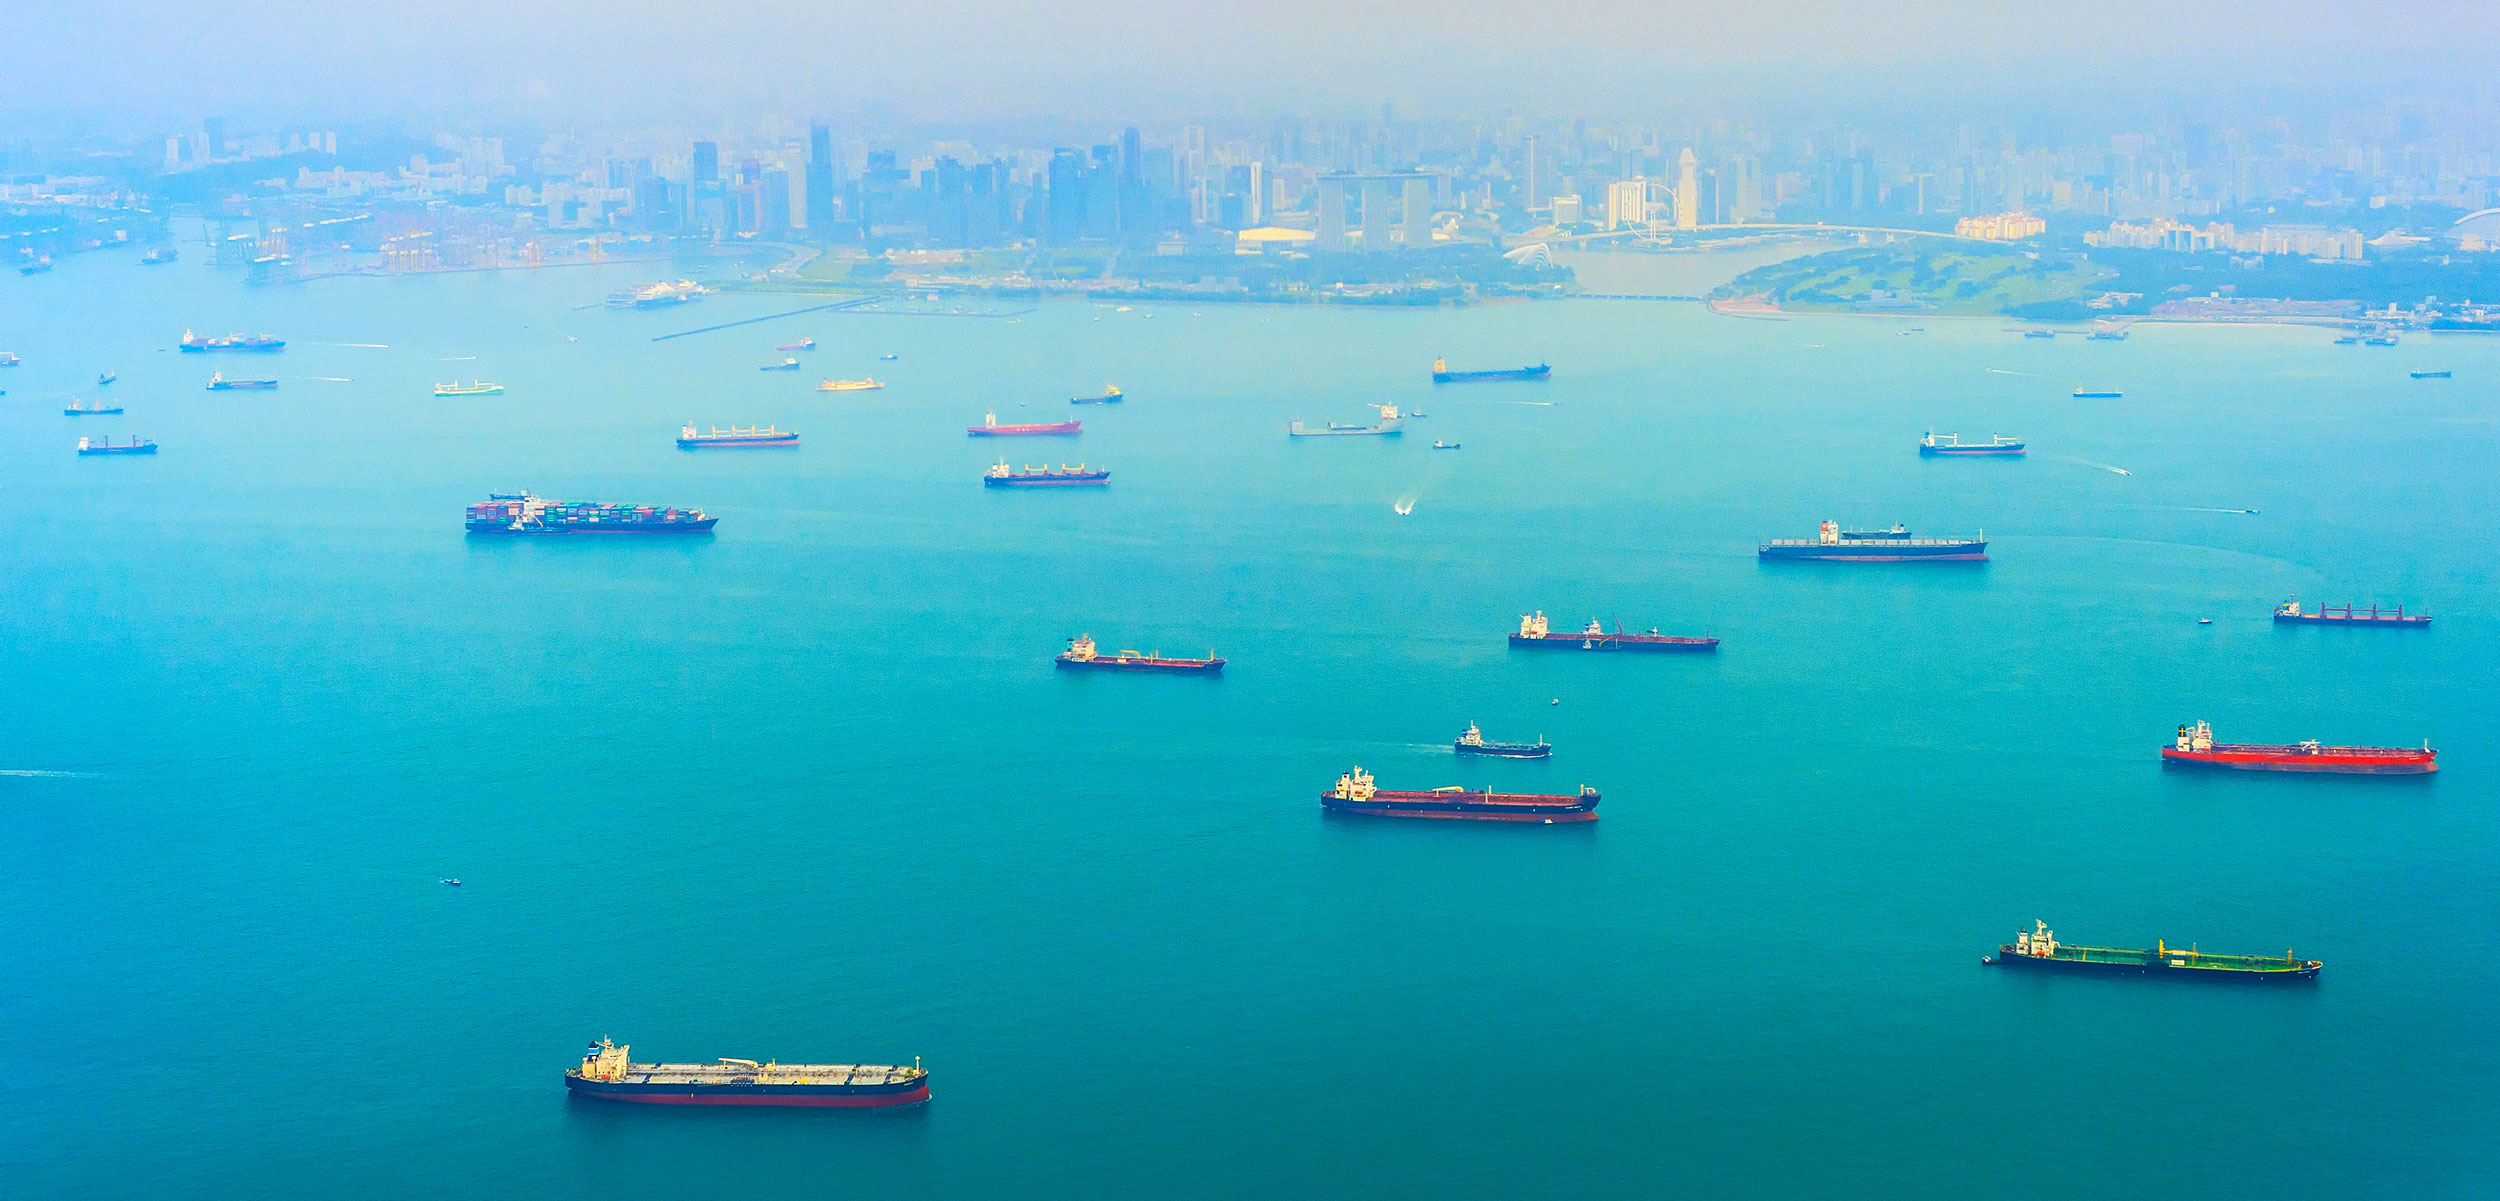 Aerial view of Singapore harbor with cargo ships, city in the background